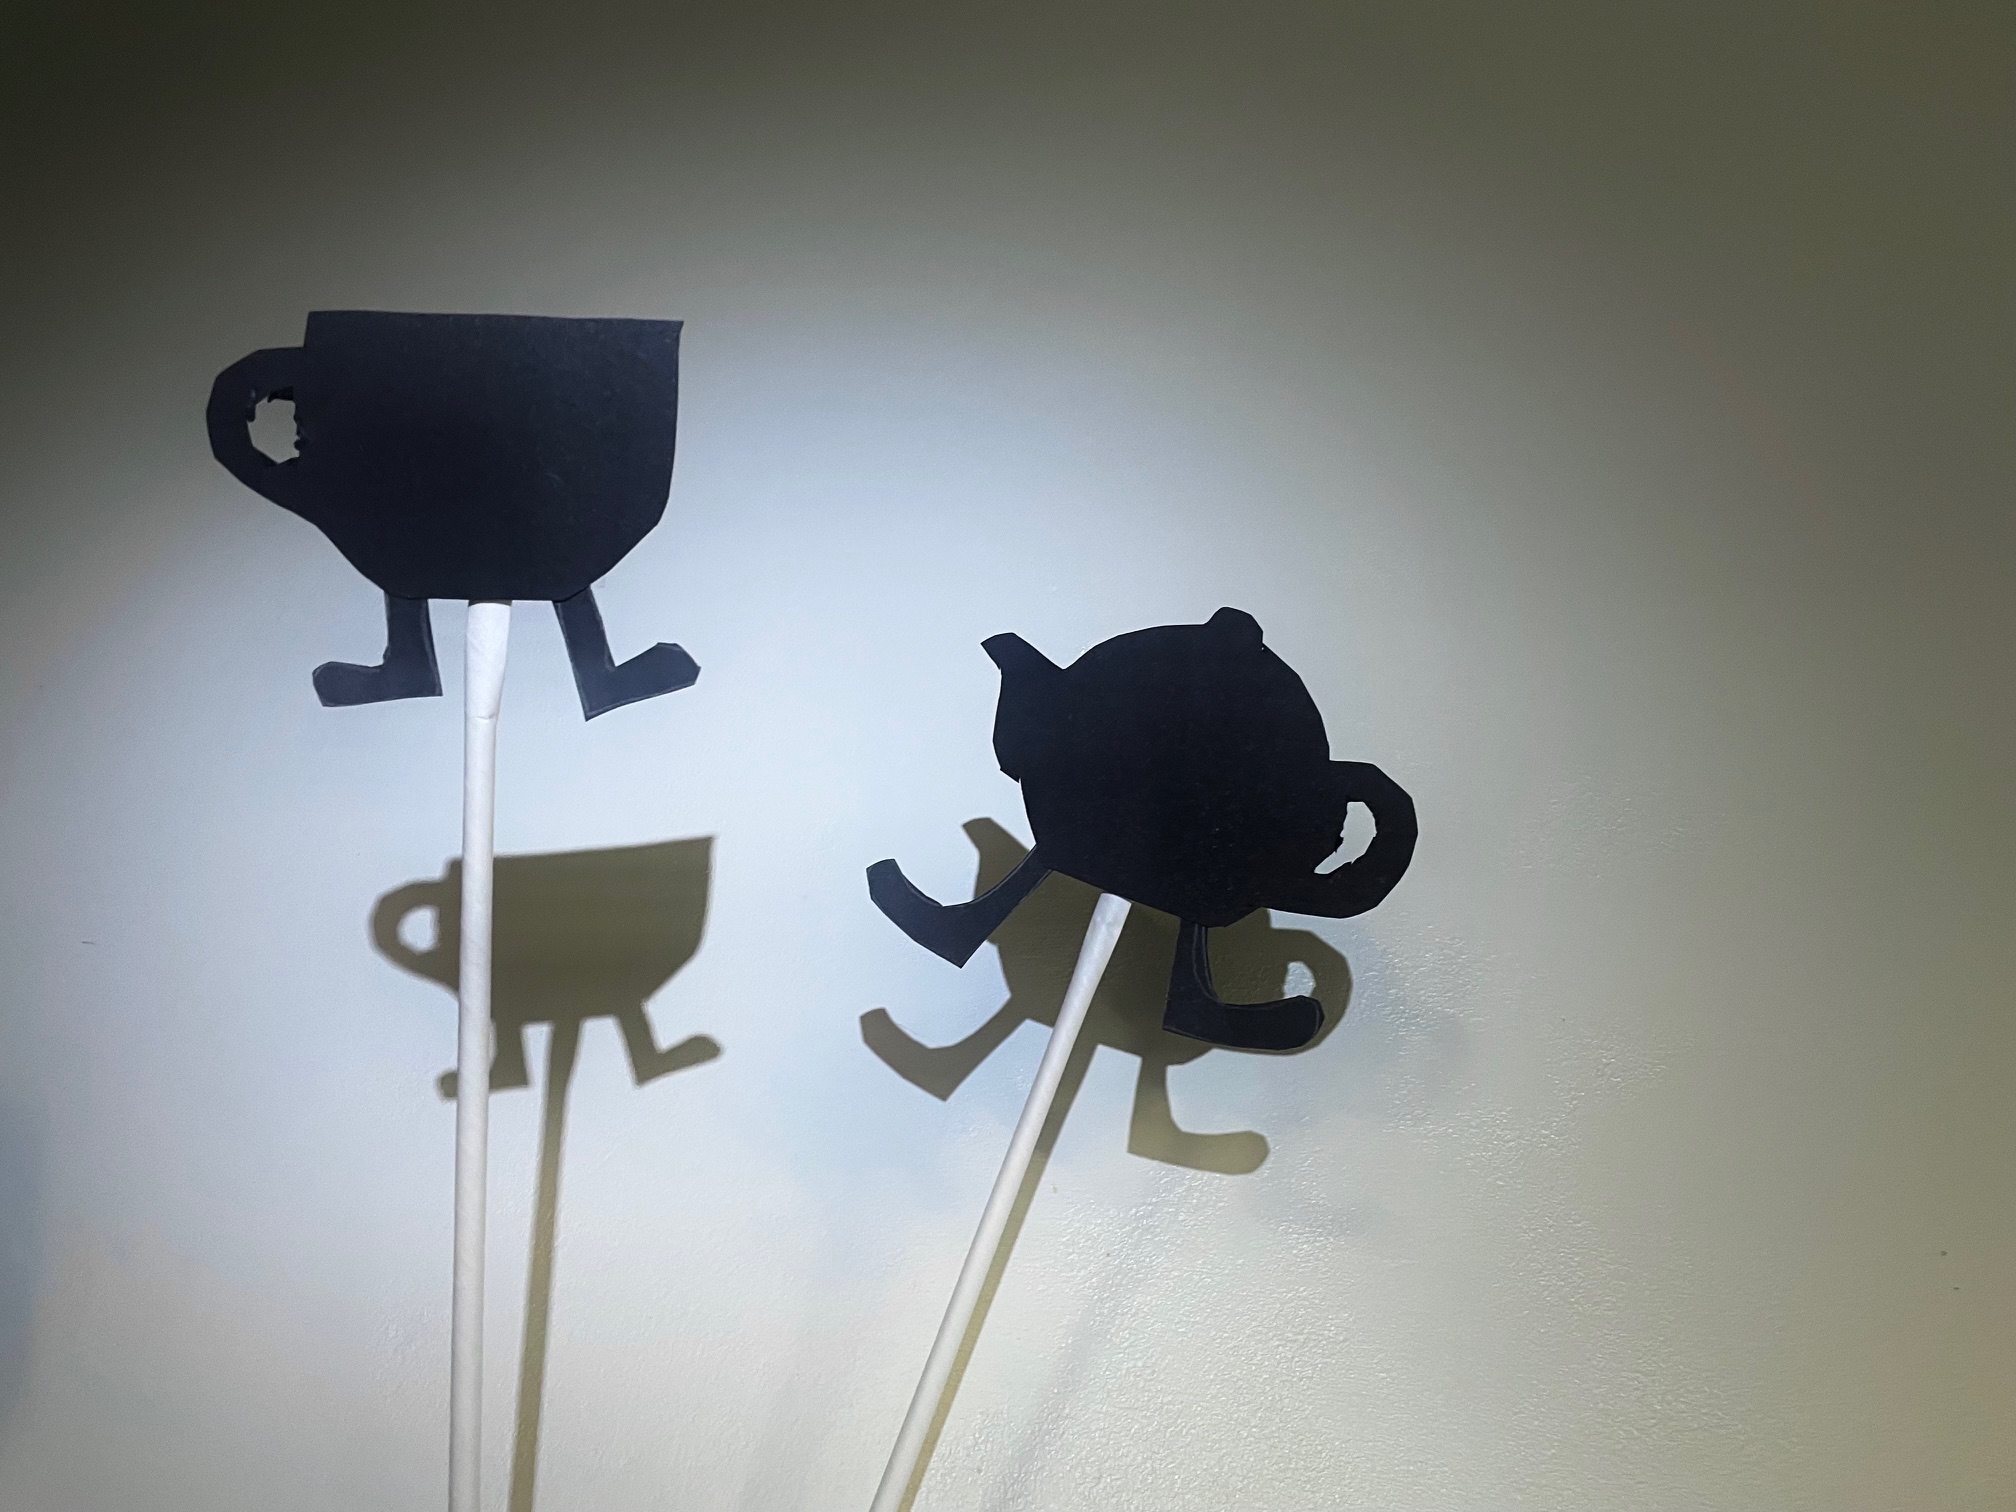 Two shadow puppets in black against a white background. A teapot and a cup, each with feet.